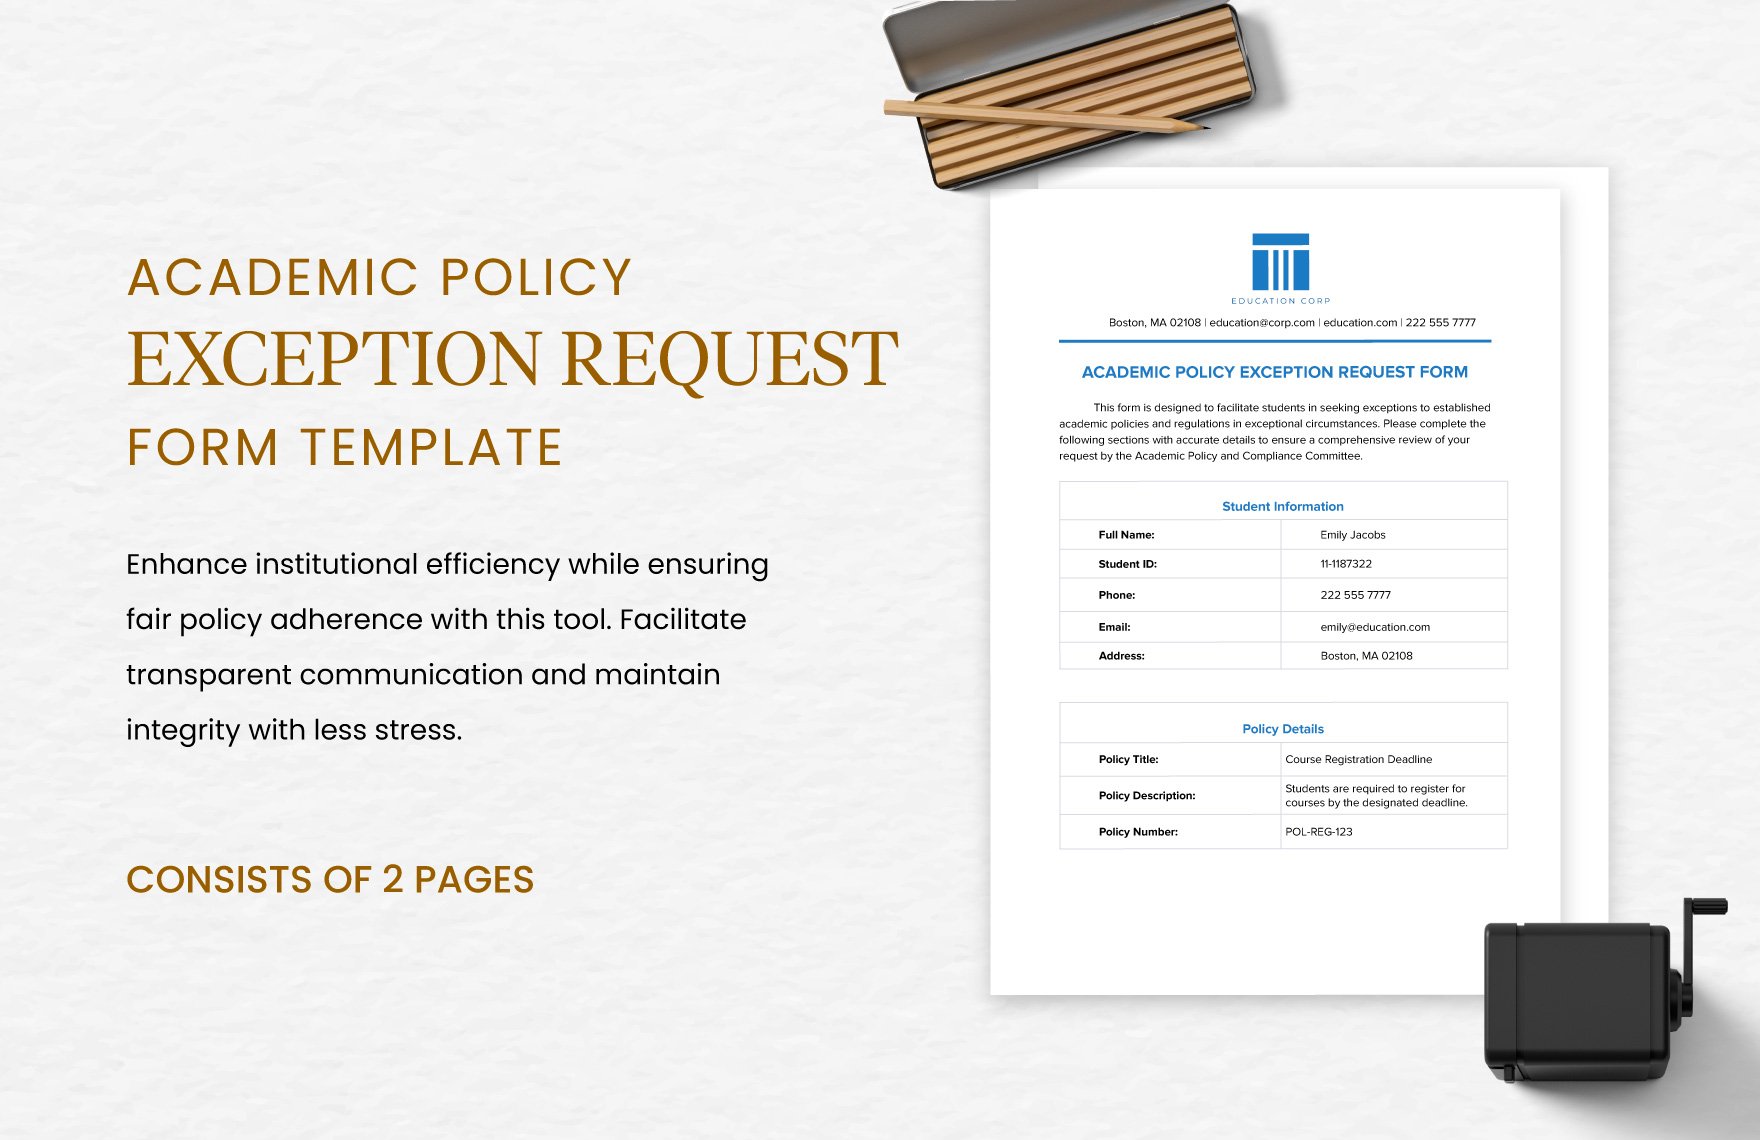 Academic Policy Exception Request Form Template